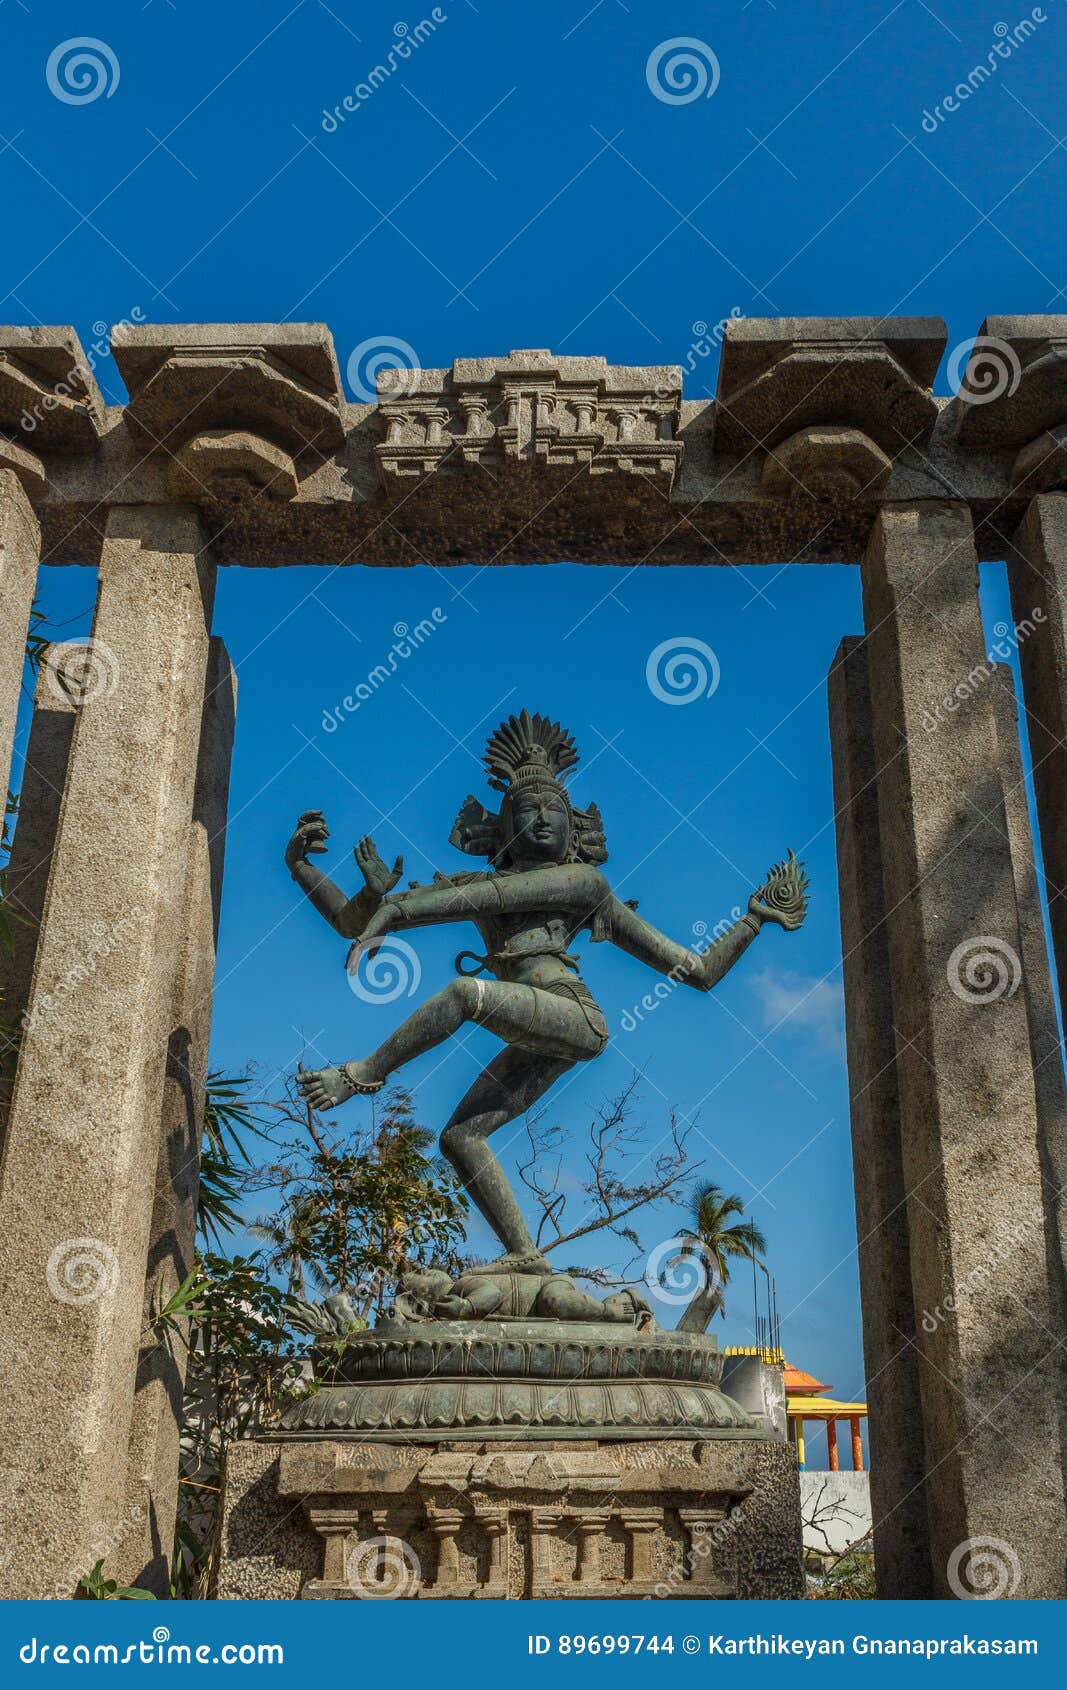 Narrow View of Ancient Lord Nataraja Dancing Sculpture Positioned ...